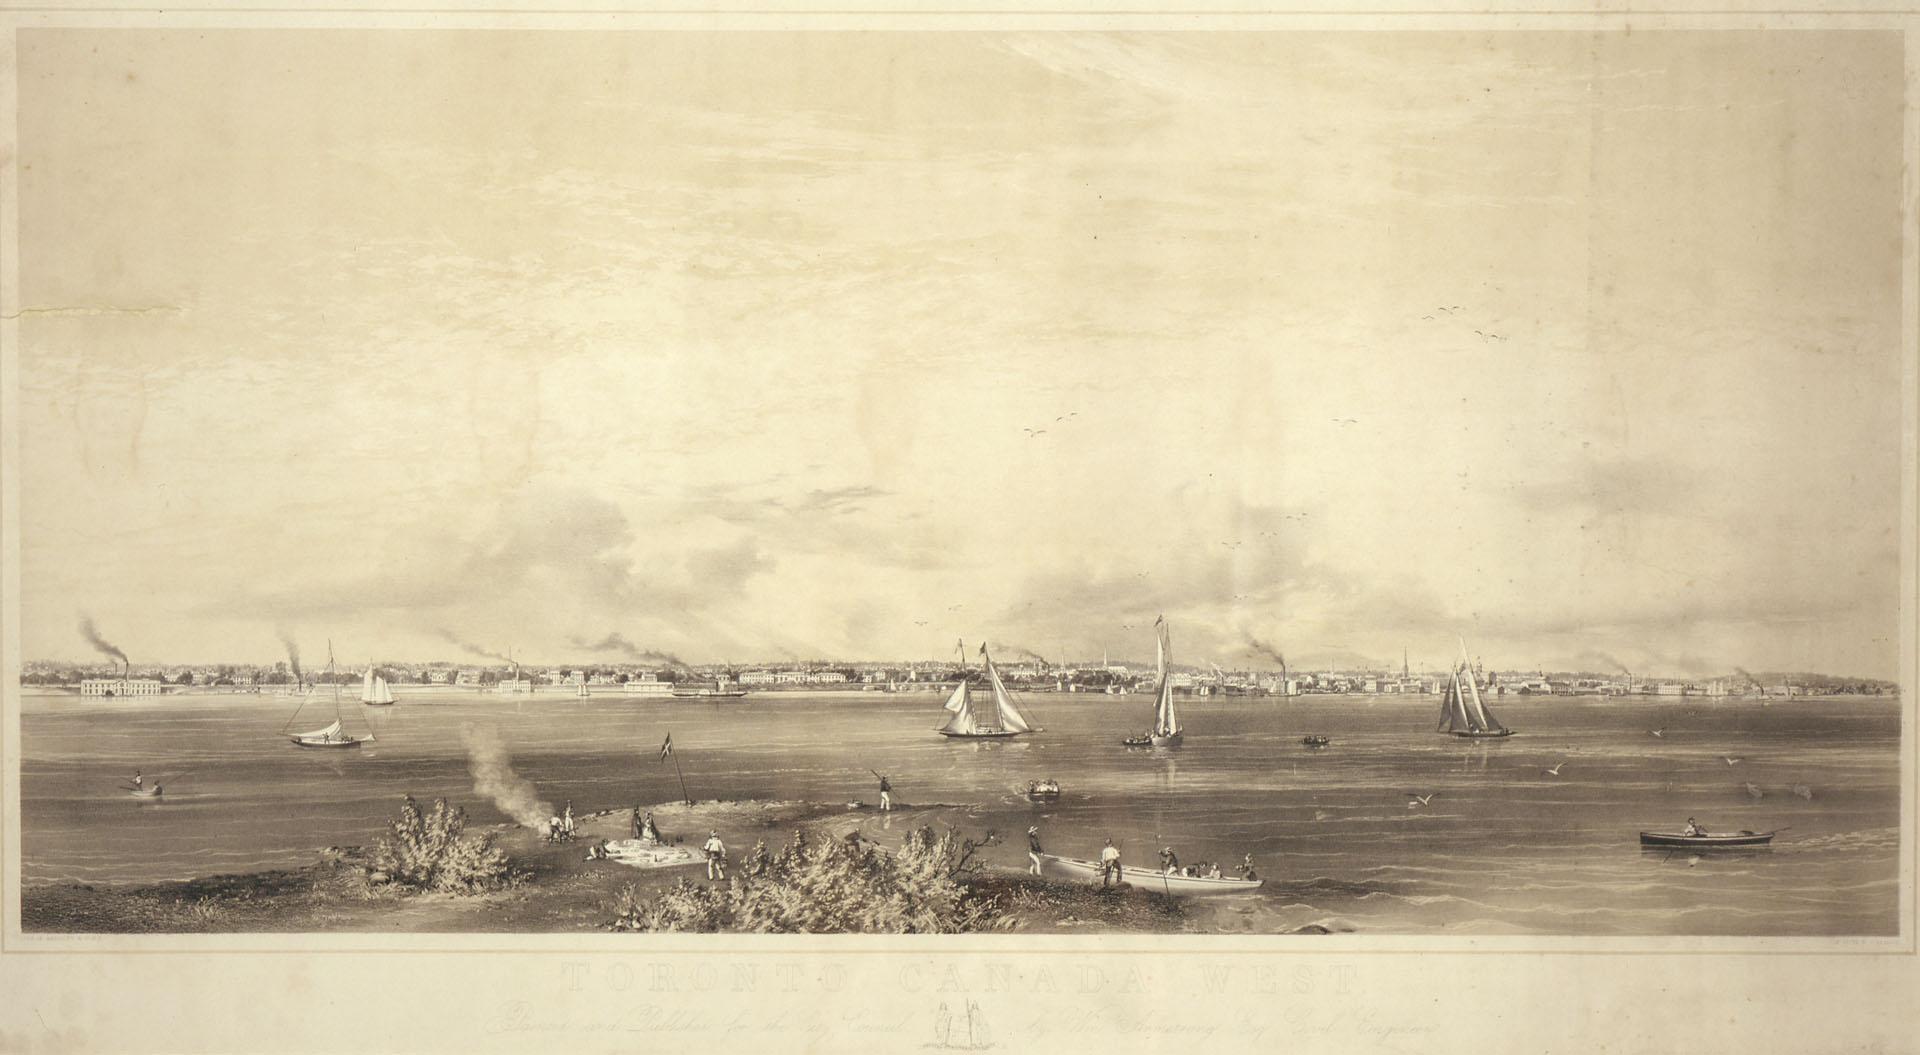 Toronto Harbour 1856, view from Hanlan's Point, showing from west of foot of Spadina Avenue on the left, to about foot of Parliament St. on the right